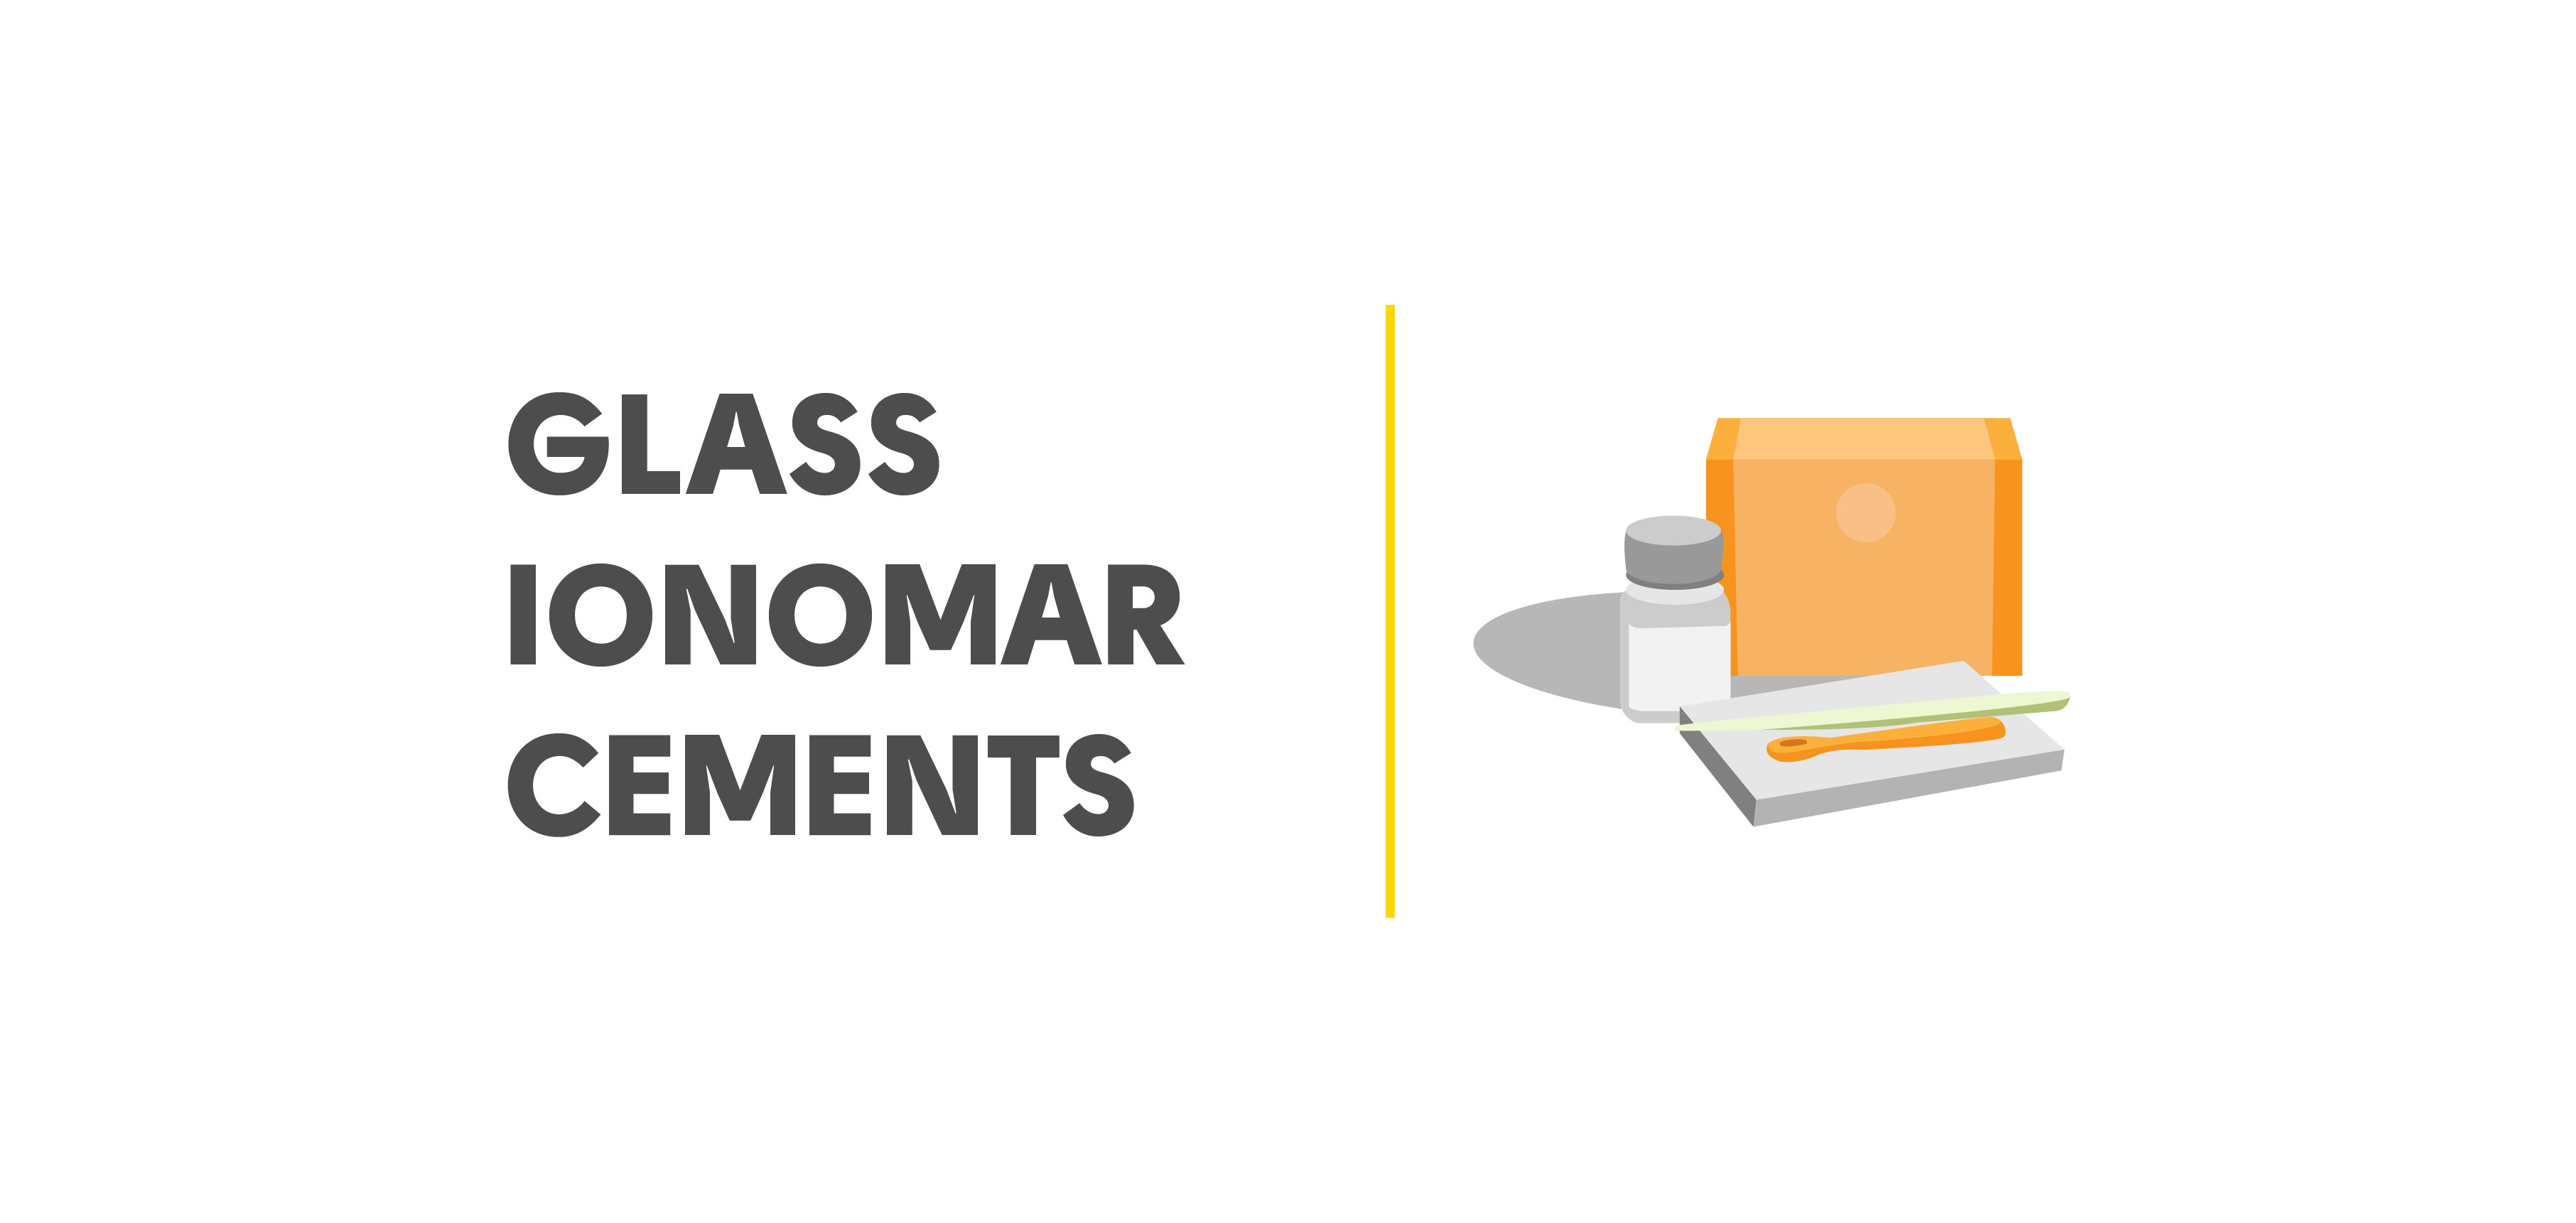 Glass Ionomer Cements